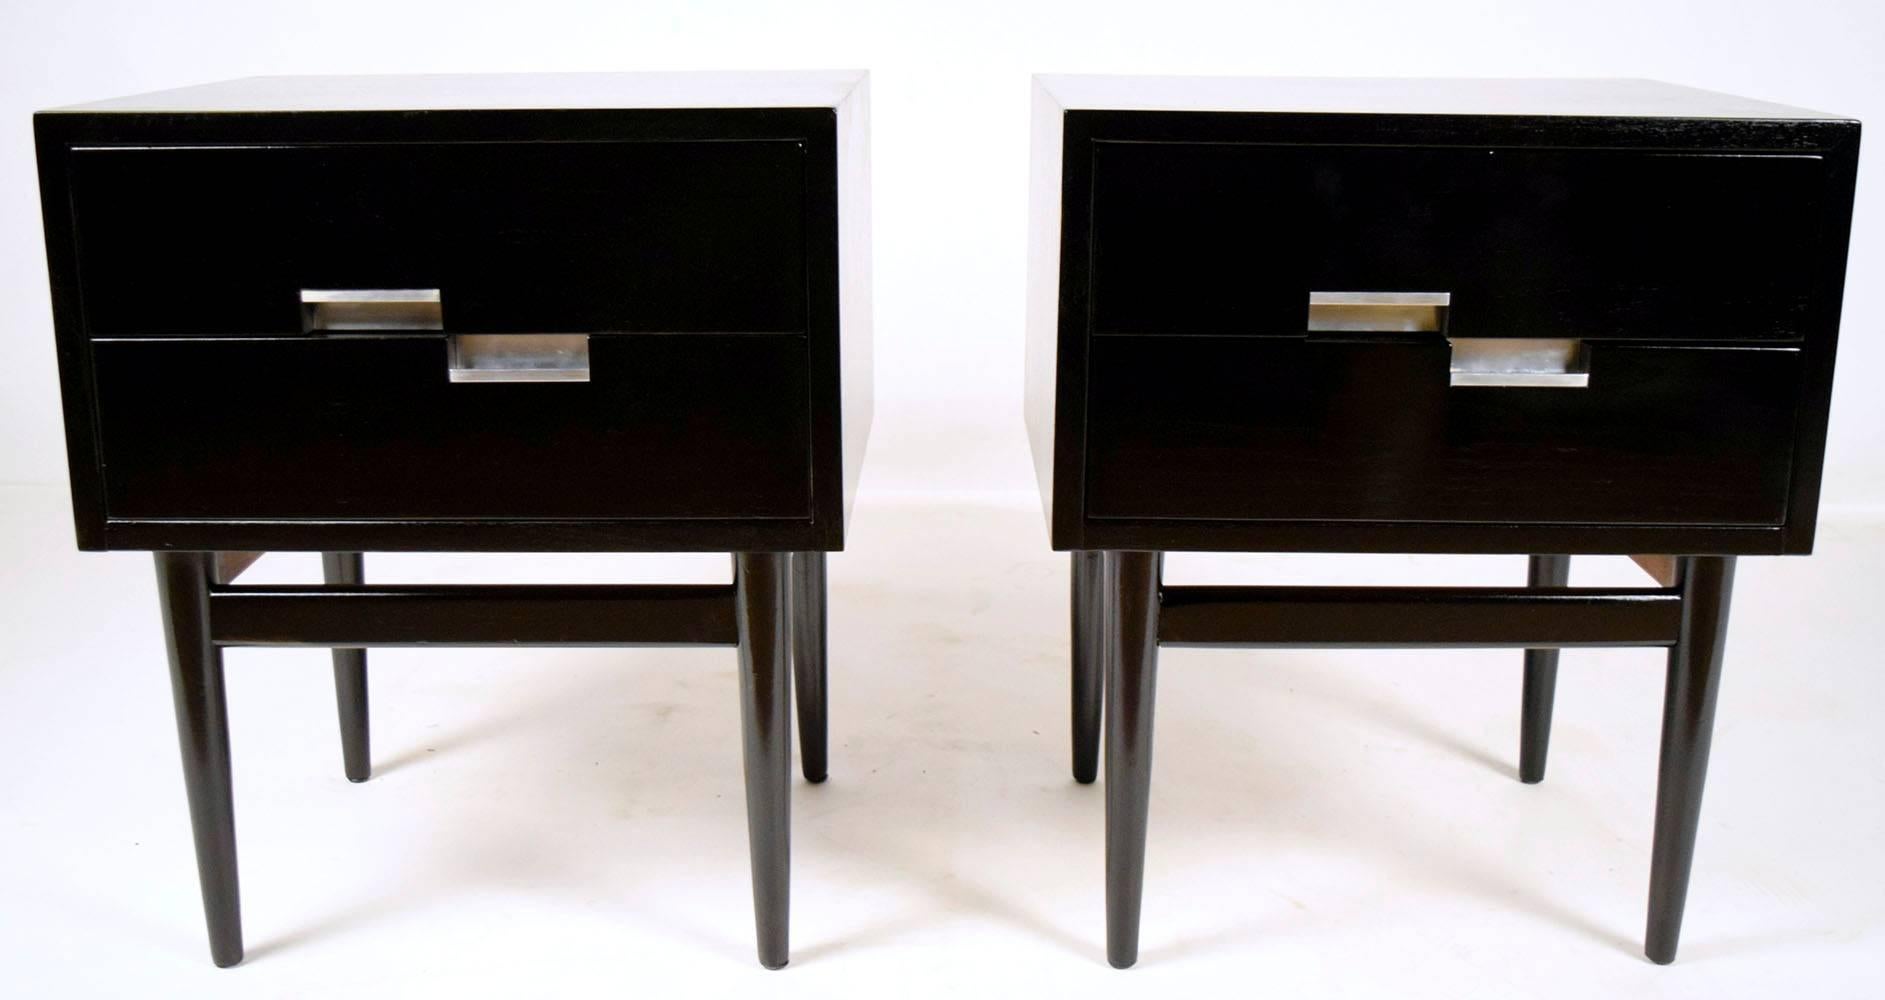 This pair of 1960s American Mid-Century Modern-style Martinsville nightstands is made of walnut wood that features a beautiful ebonized finish. The top of the nightstands are made of wood with inlaid aluminium X-shaped details on the corners. There